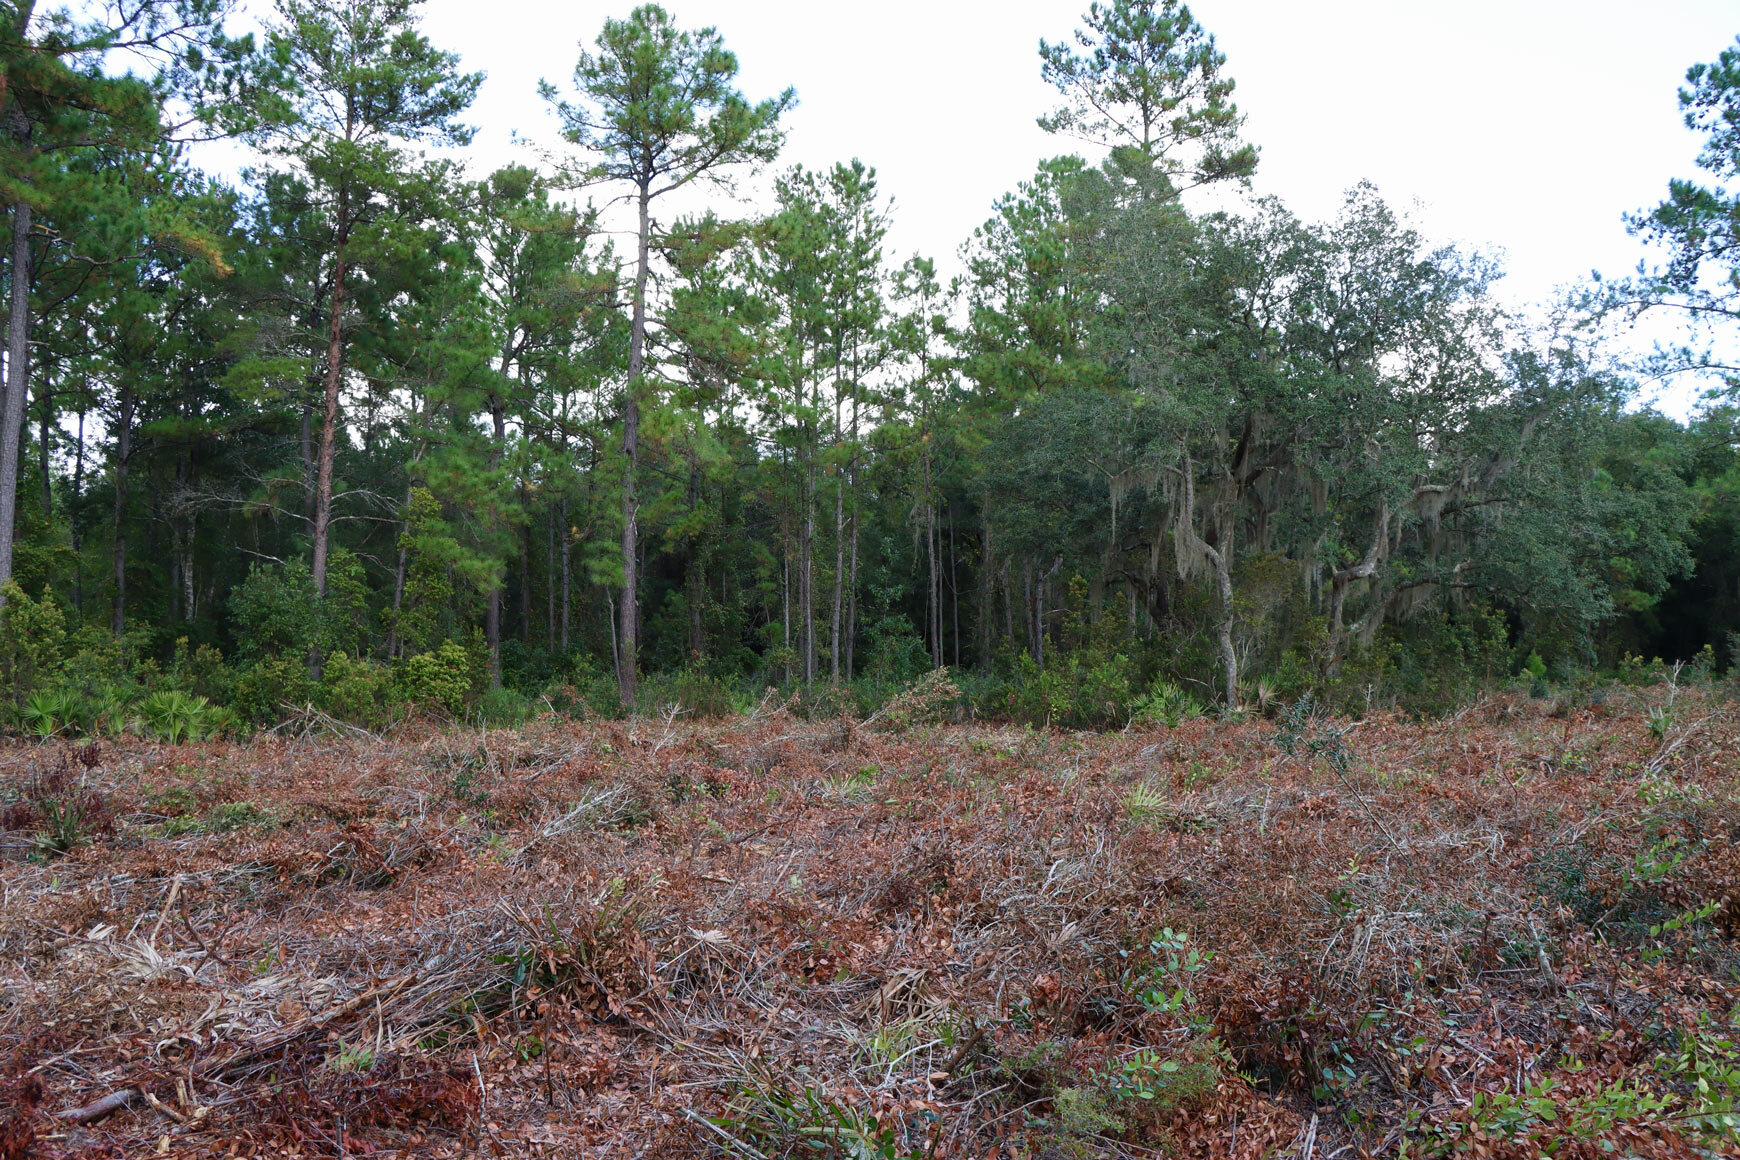  Scrub habitat undergoing restoration  (Twisted live scrub oak, saw palmetto, and longleaf pines in the the distance with a mowed foreground of brown, dead vegetation).  